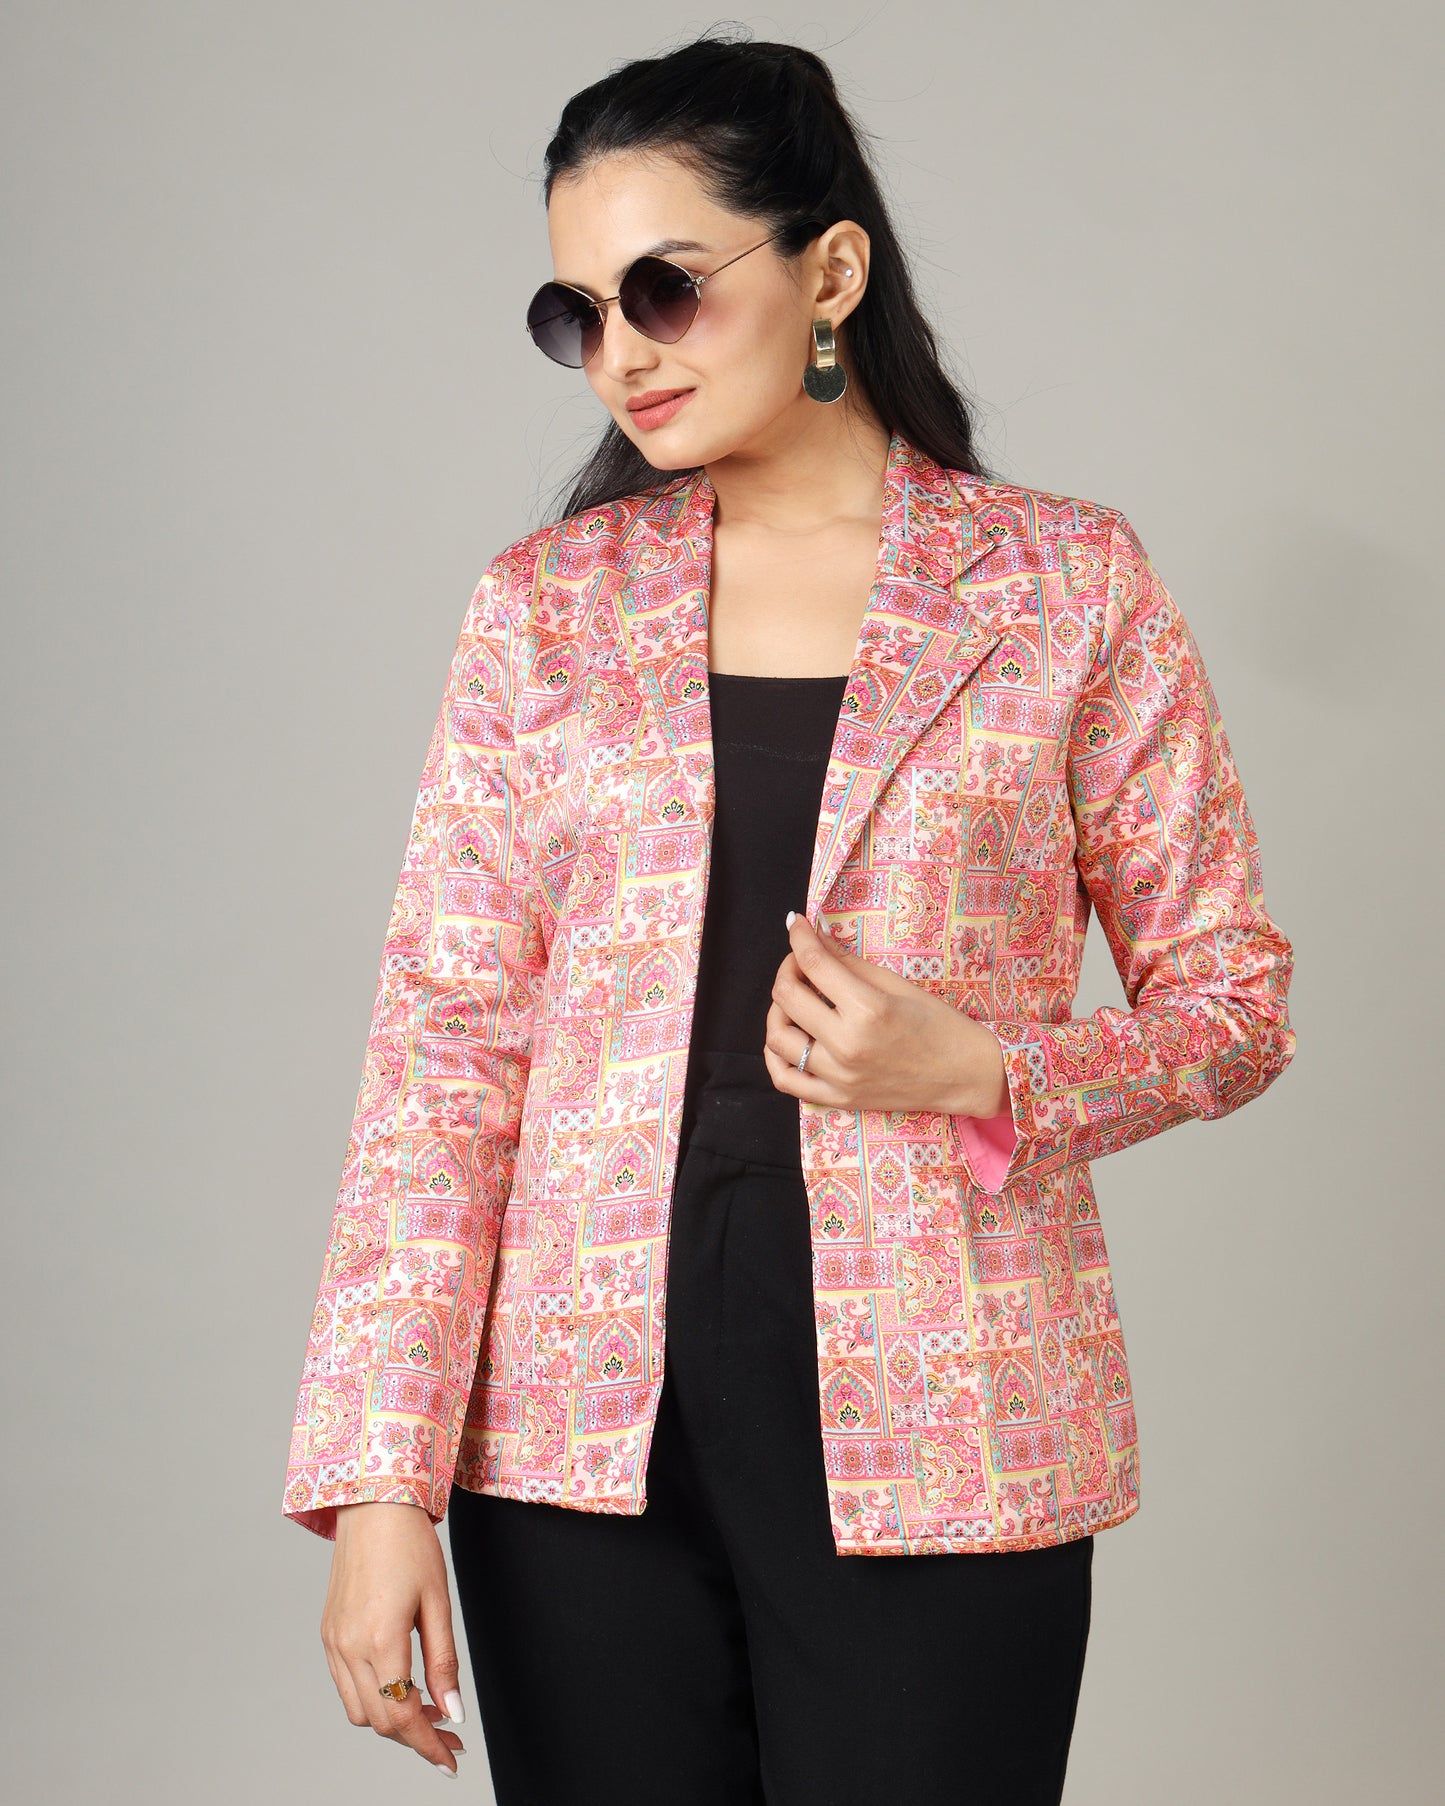 Heritage Chic-The Timeless Tradition Jacket For Women